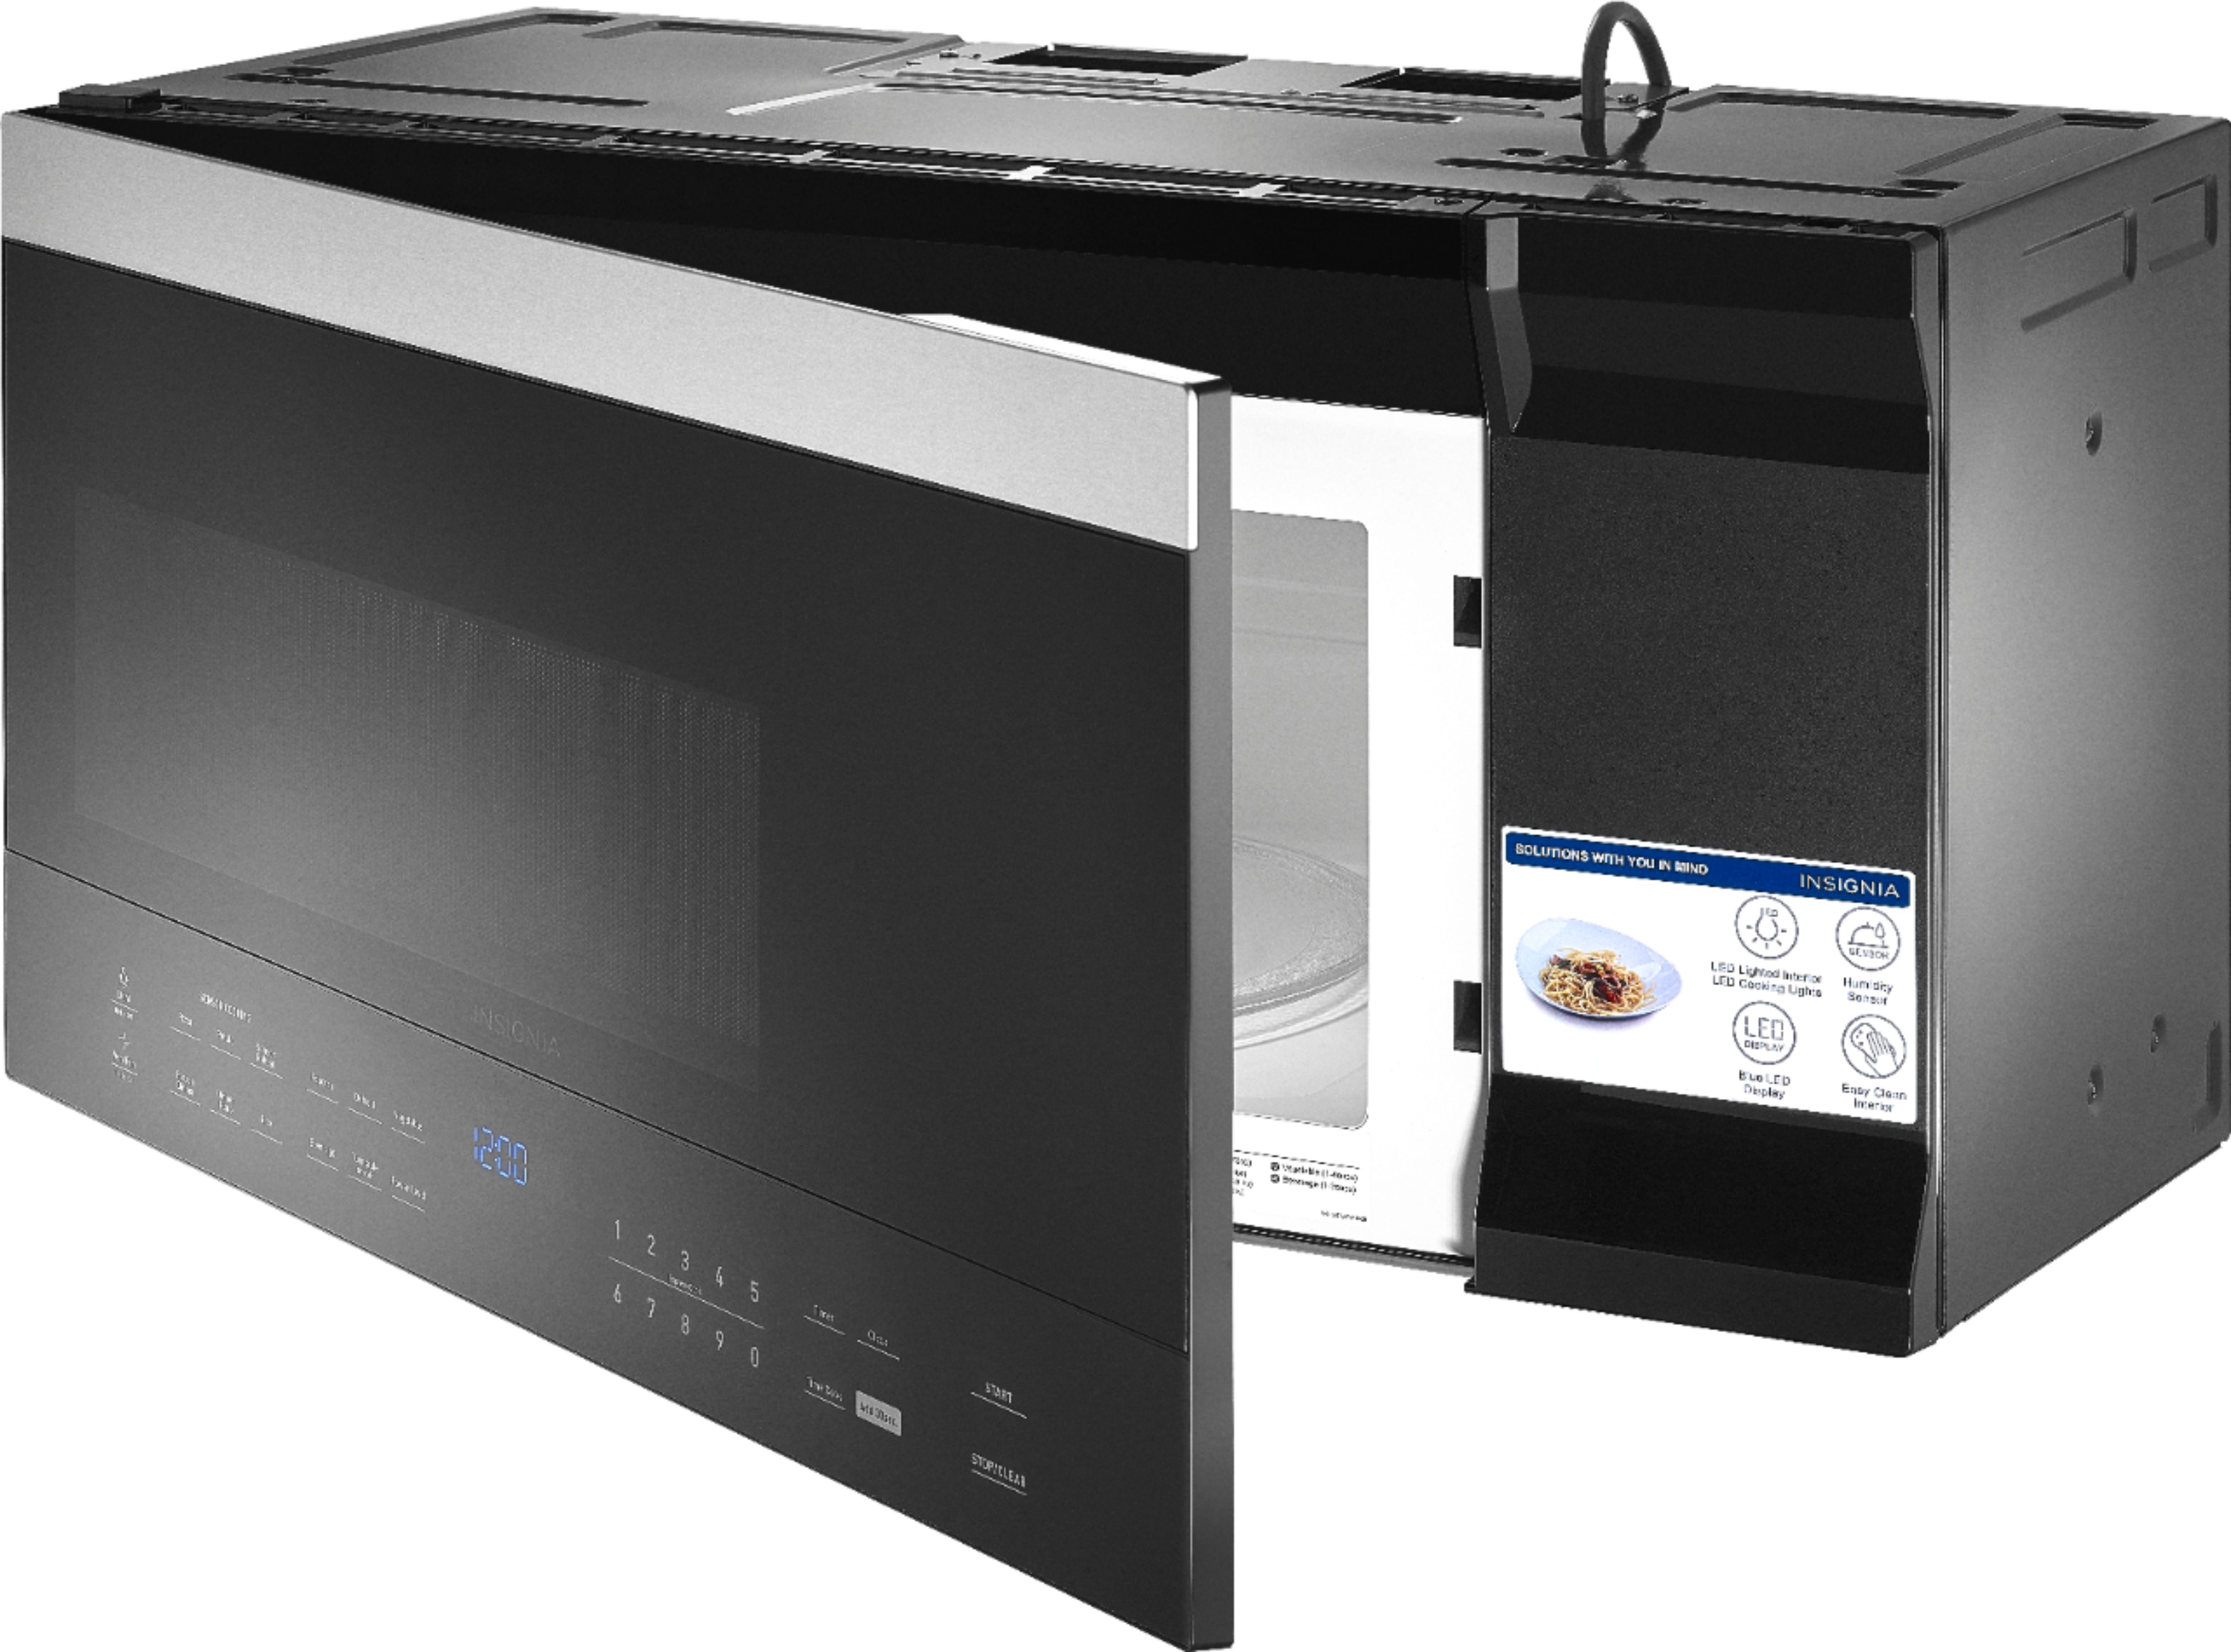 INSIGNIA 1.2 CU. FT. MICROWAVE (BLACK & STAINLESS STEEL) – NS-MW12SS6-C